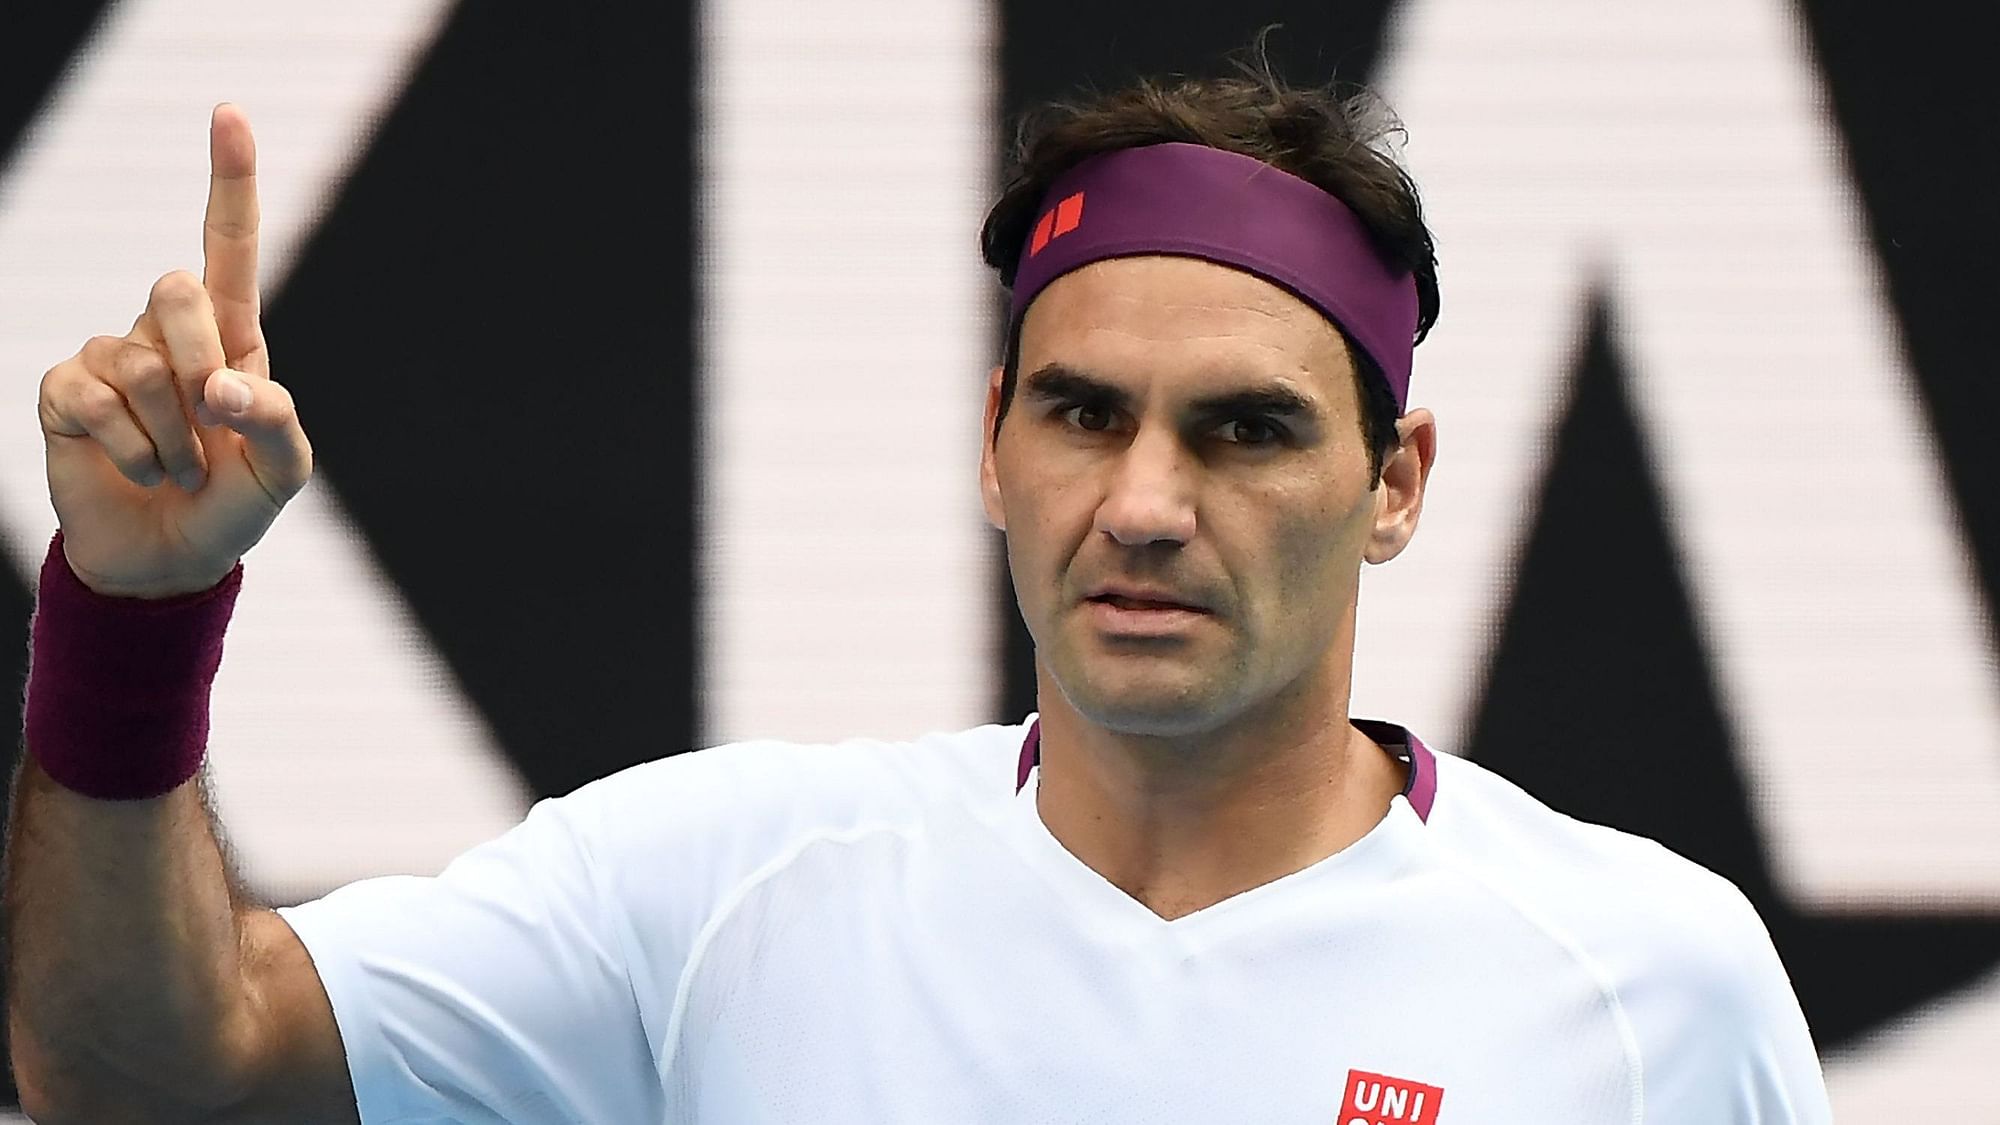 Roger Federer has announced he will be out of action for the rest of the 2020 season after undergoing surgery on his right knee.